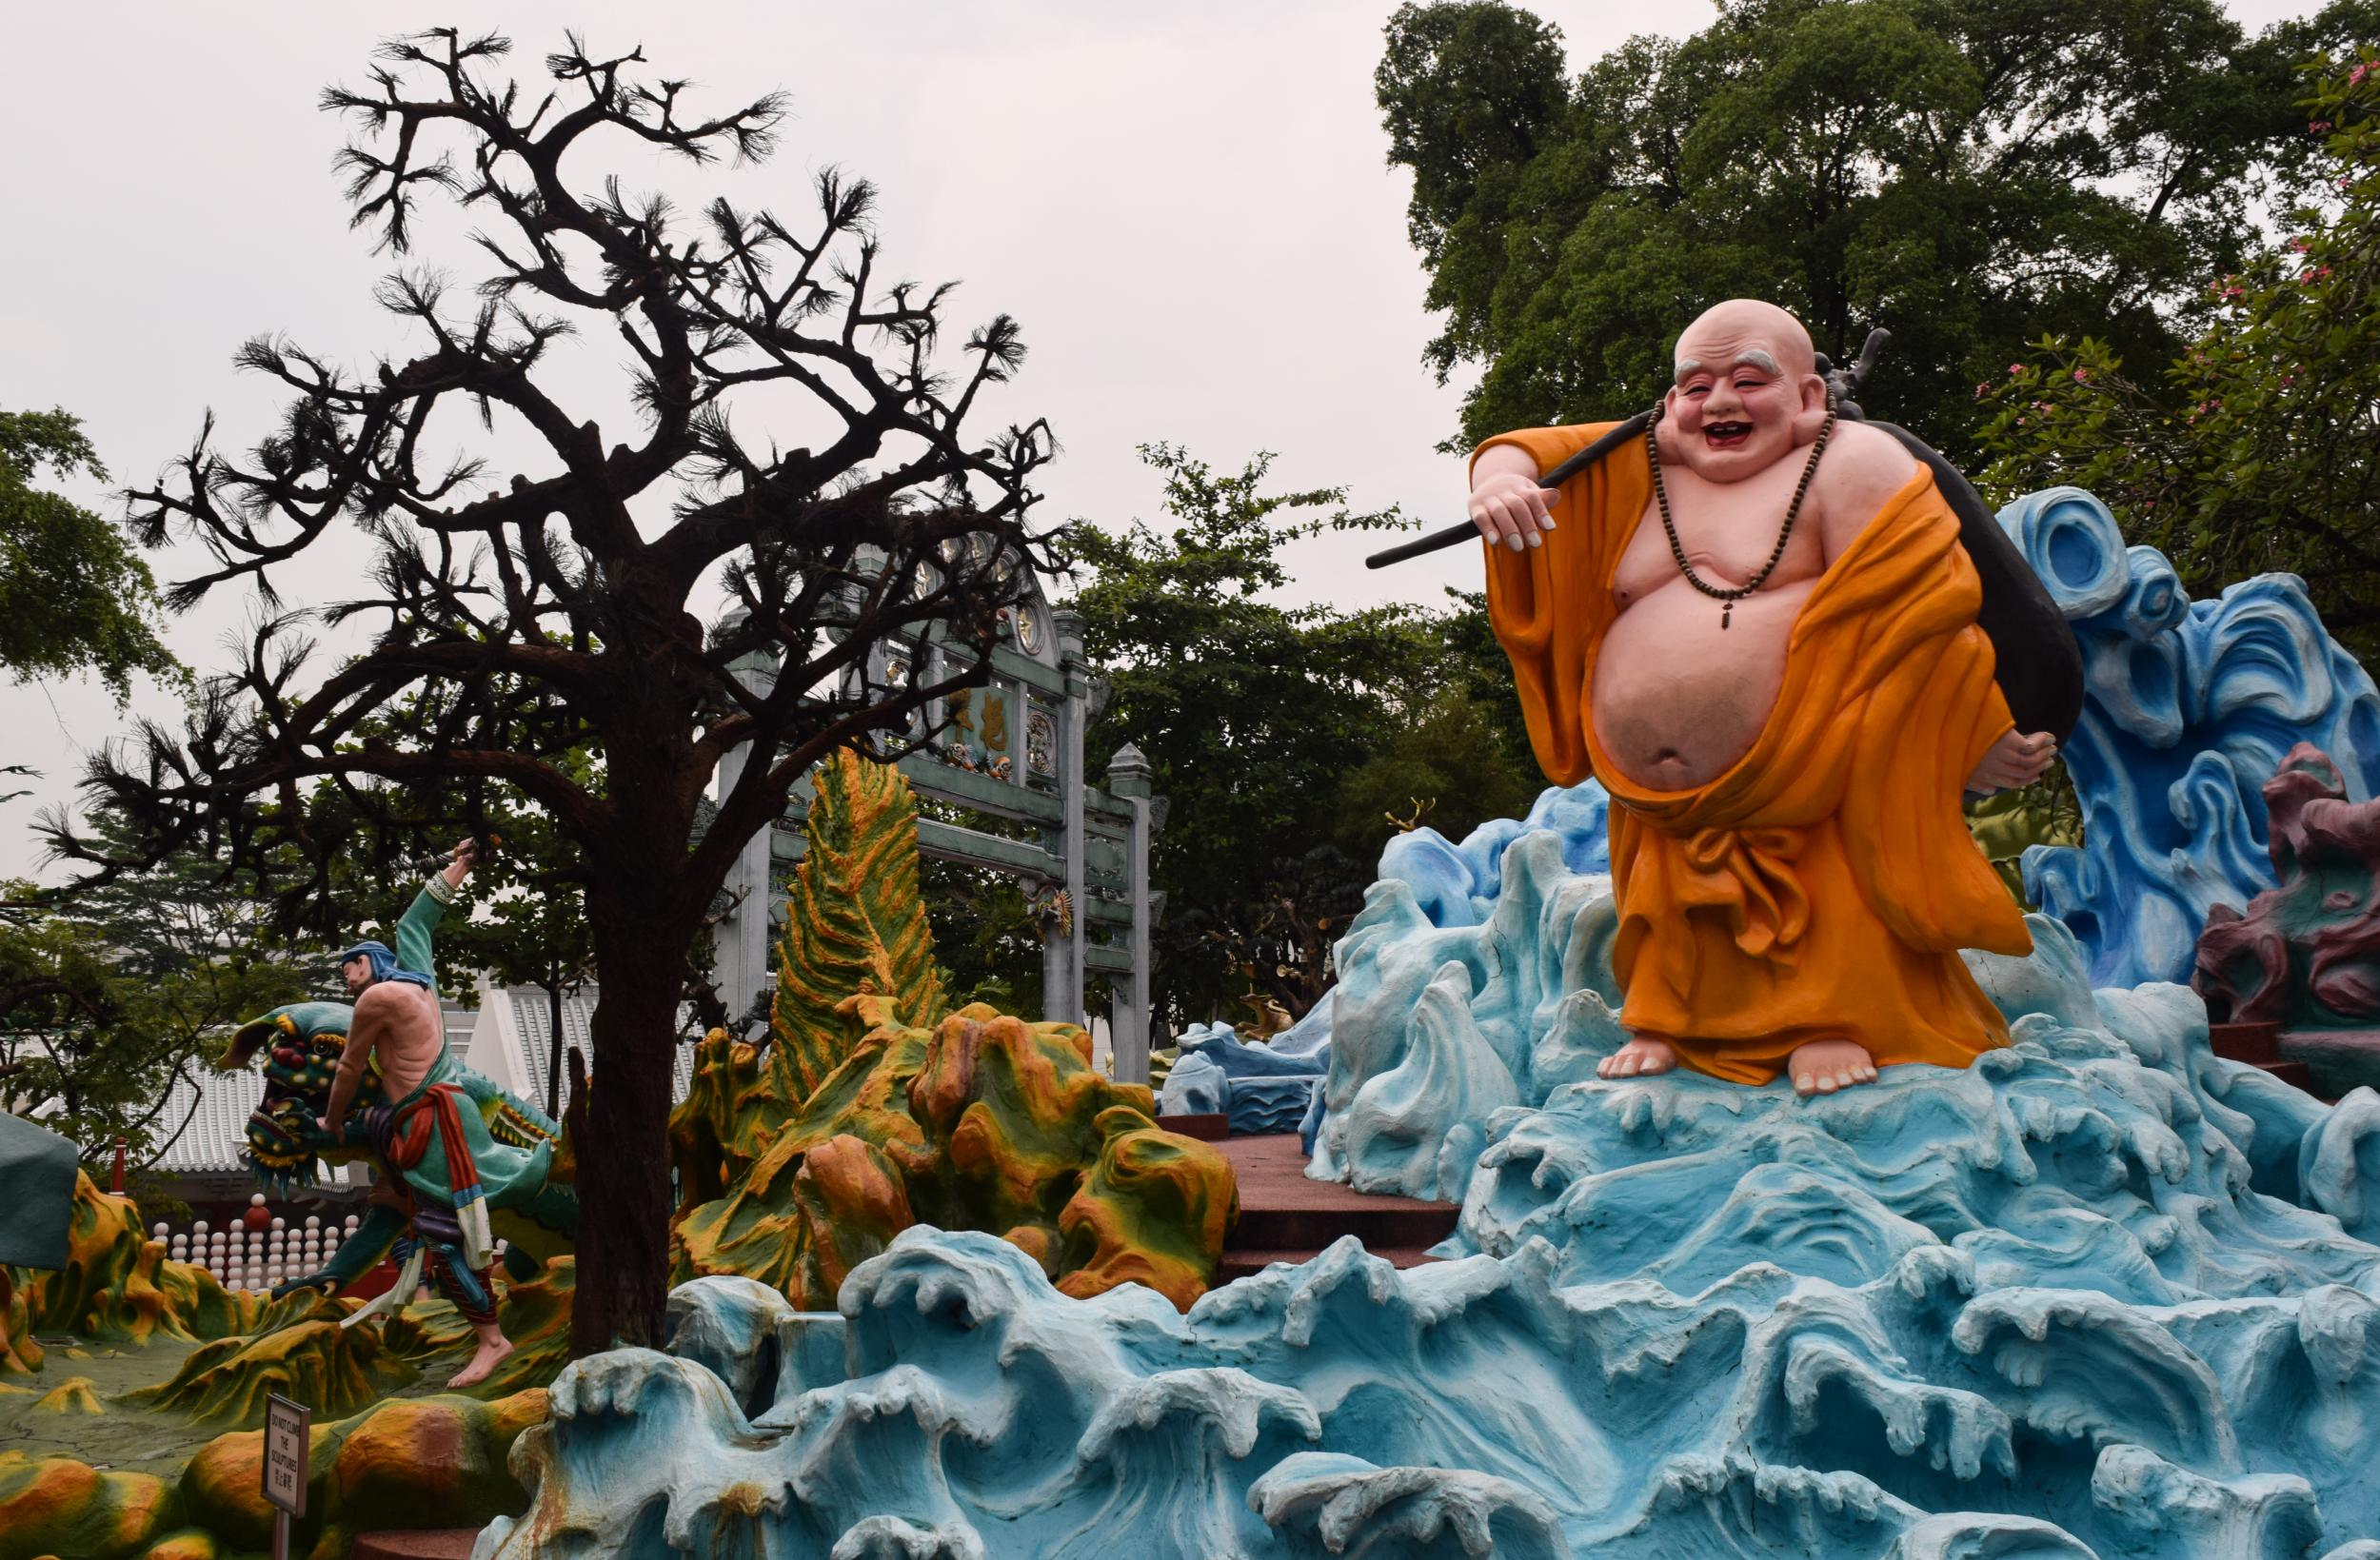 Haw Par Villa was built using wealth from the Tiger Balm empire